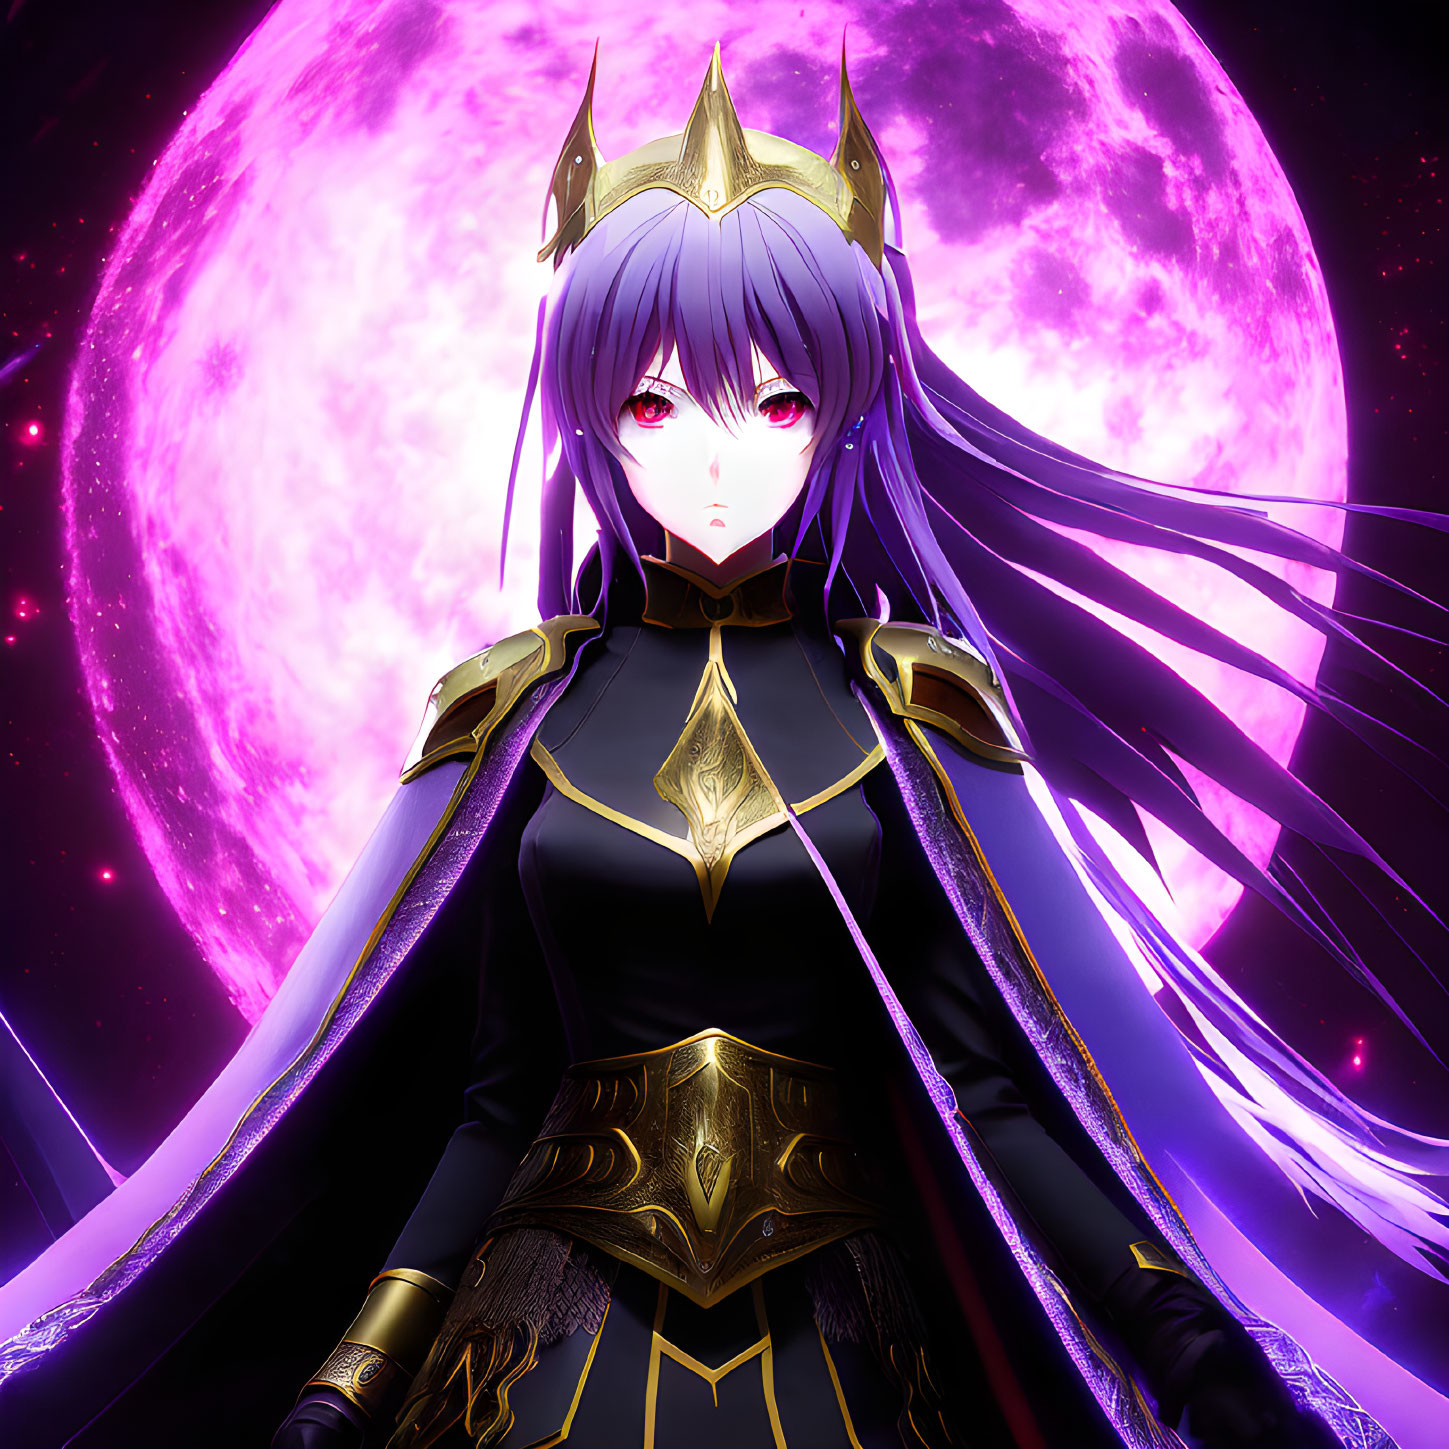 Purple-haired anime character in golden crown and armor under pink moon